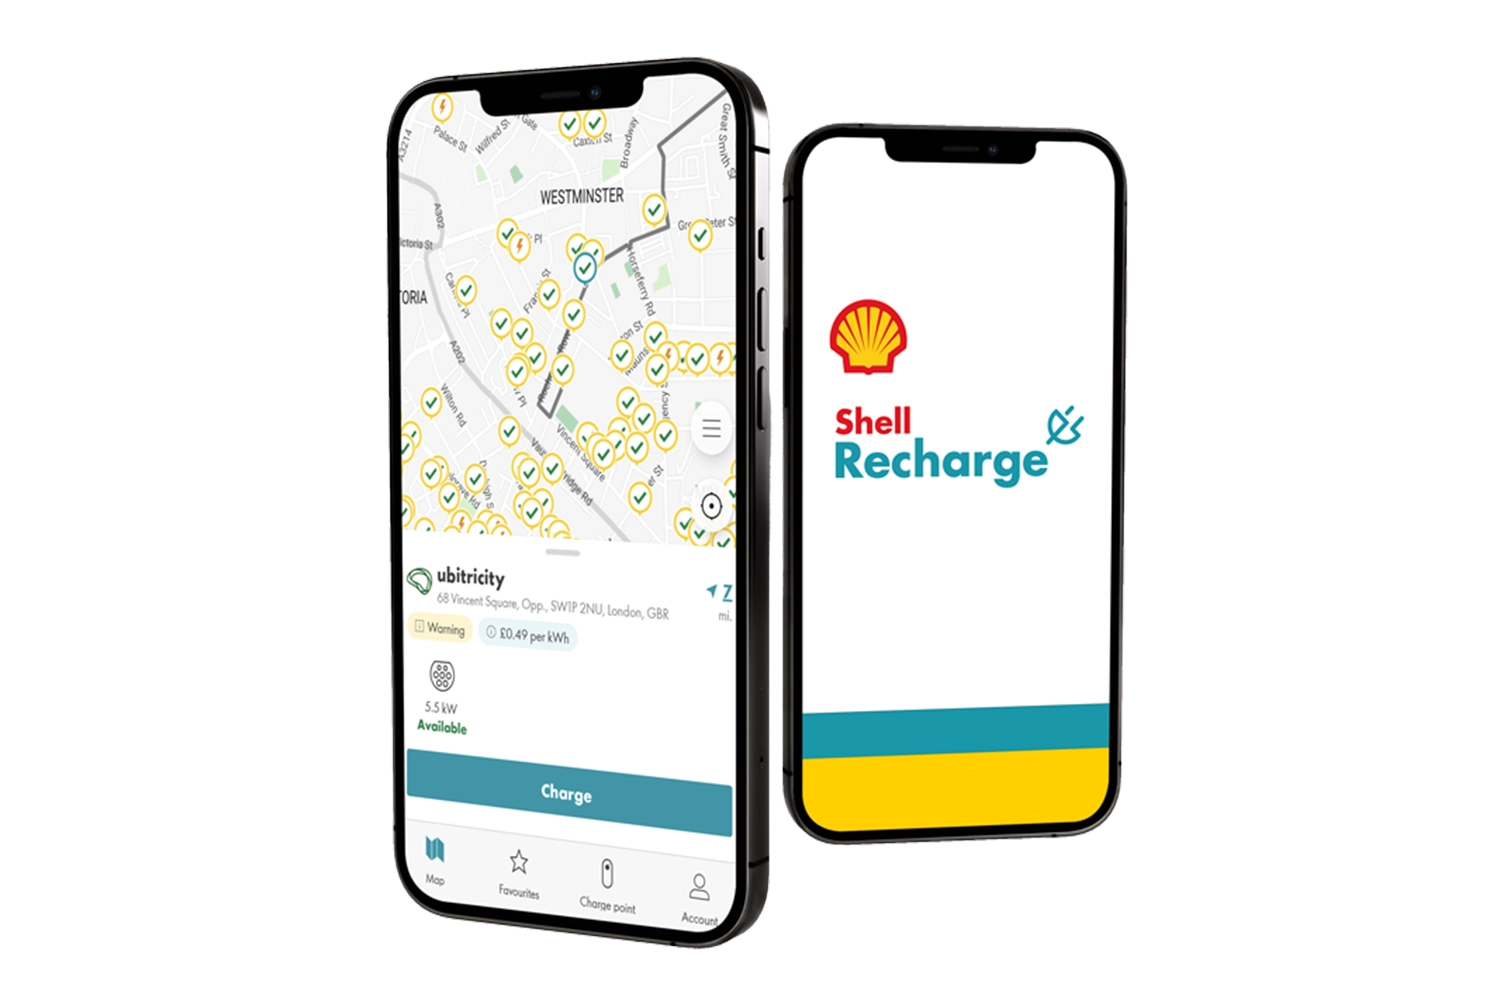 Two smartphone screens show ubitricity's charging stations in the Shell Recharge App, used by EV drivers when asking how to charge an electric vehicle in public.